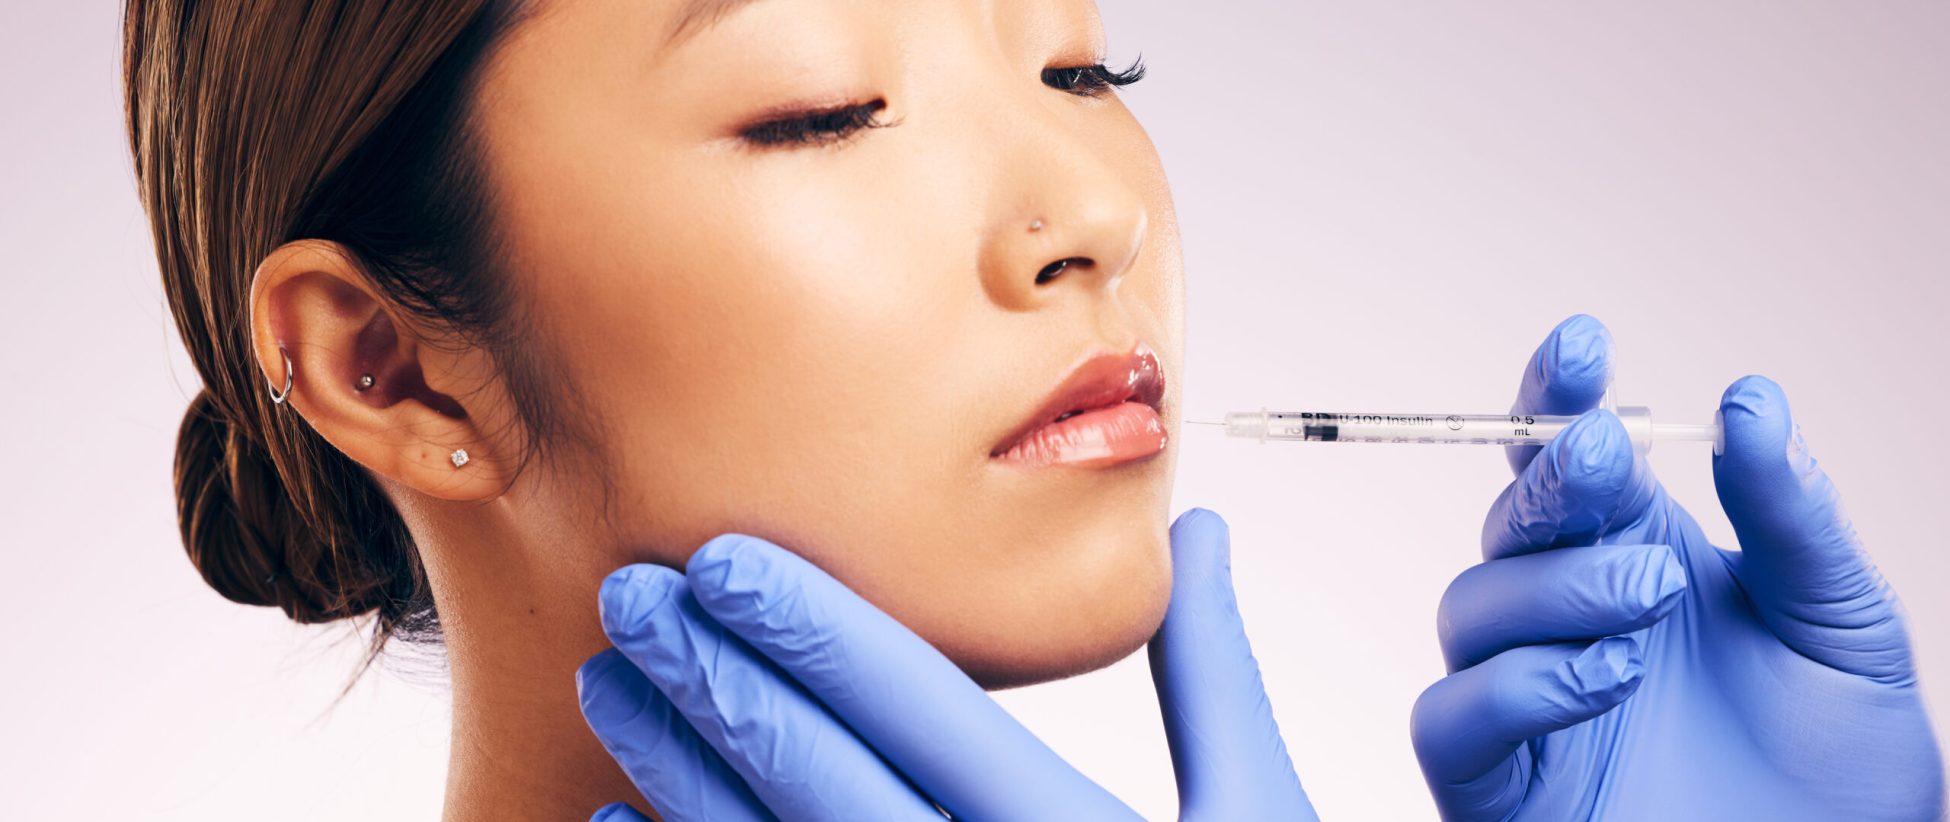 Lips injection, skincare and woman with plastic surgery in studio isolated on a white background. C.